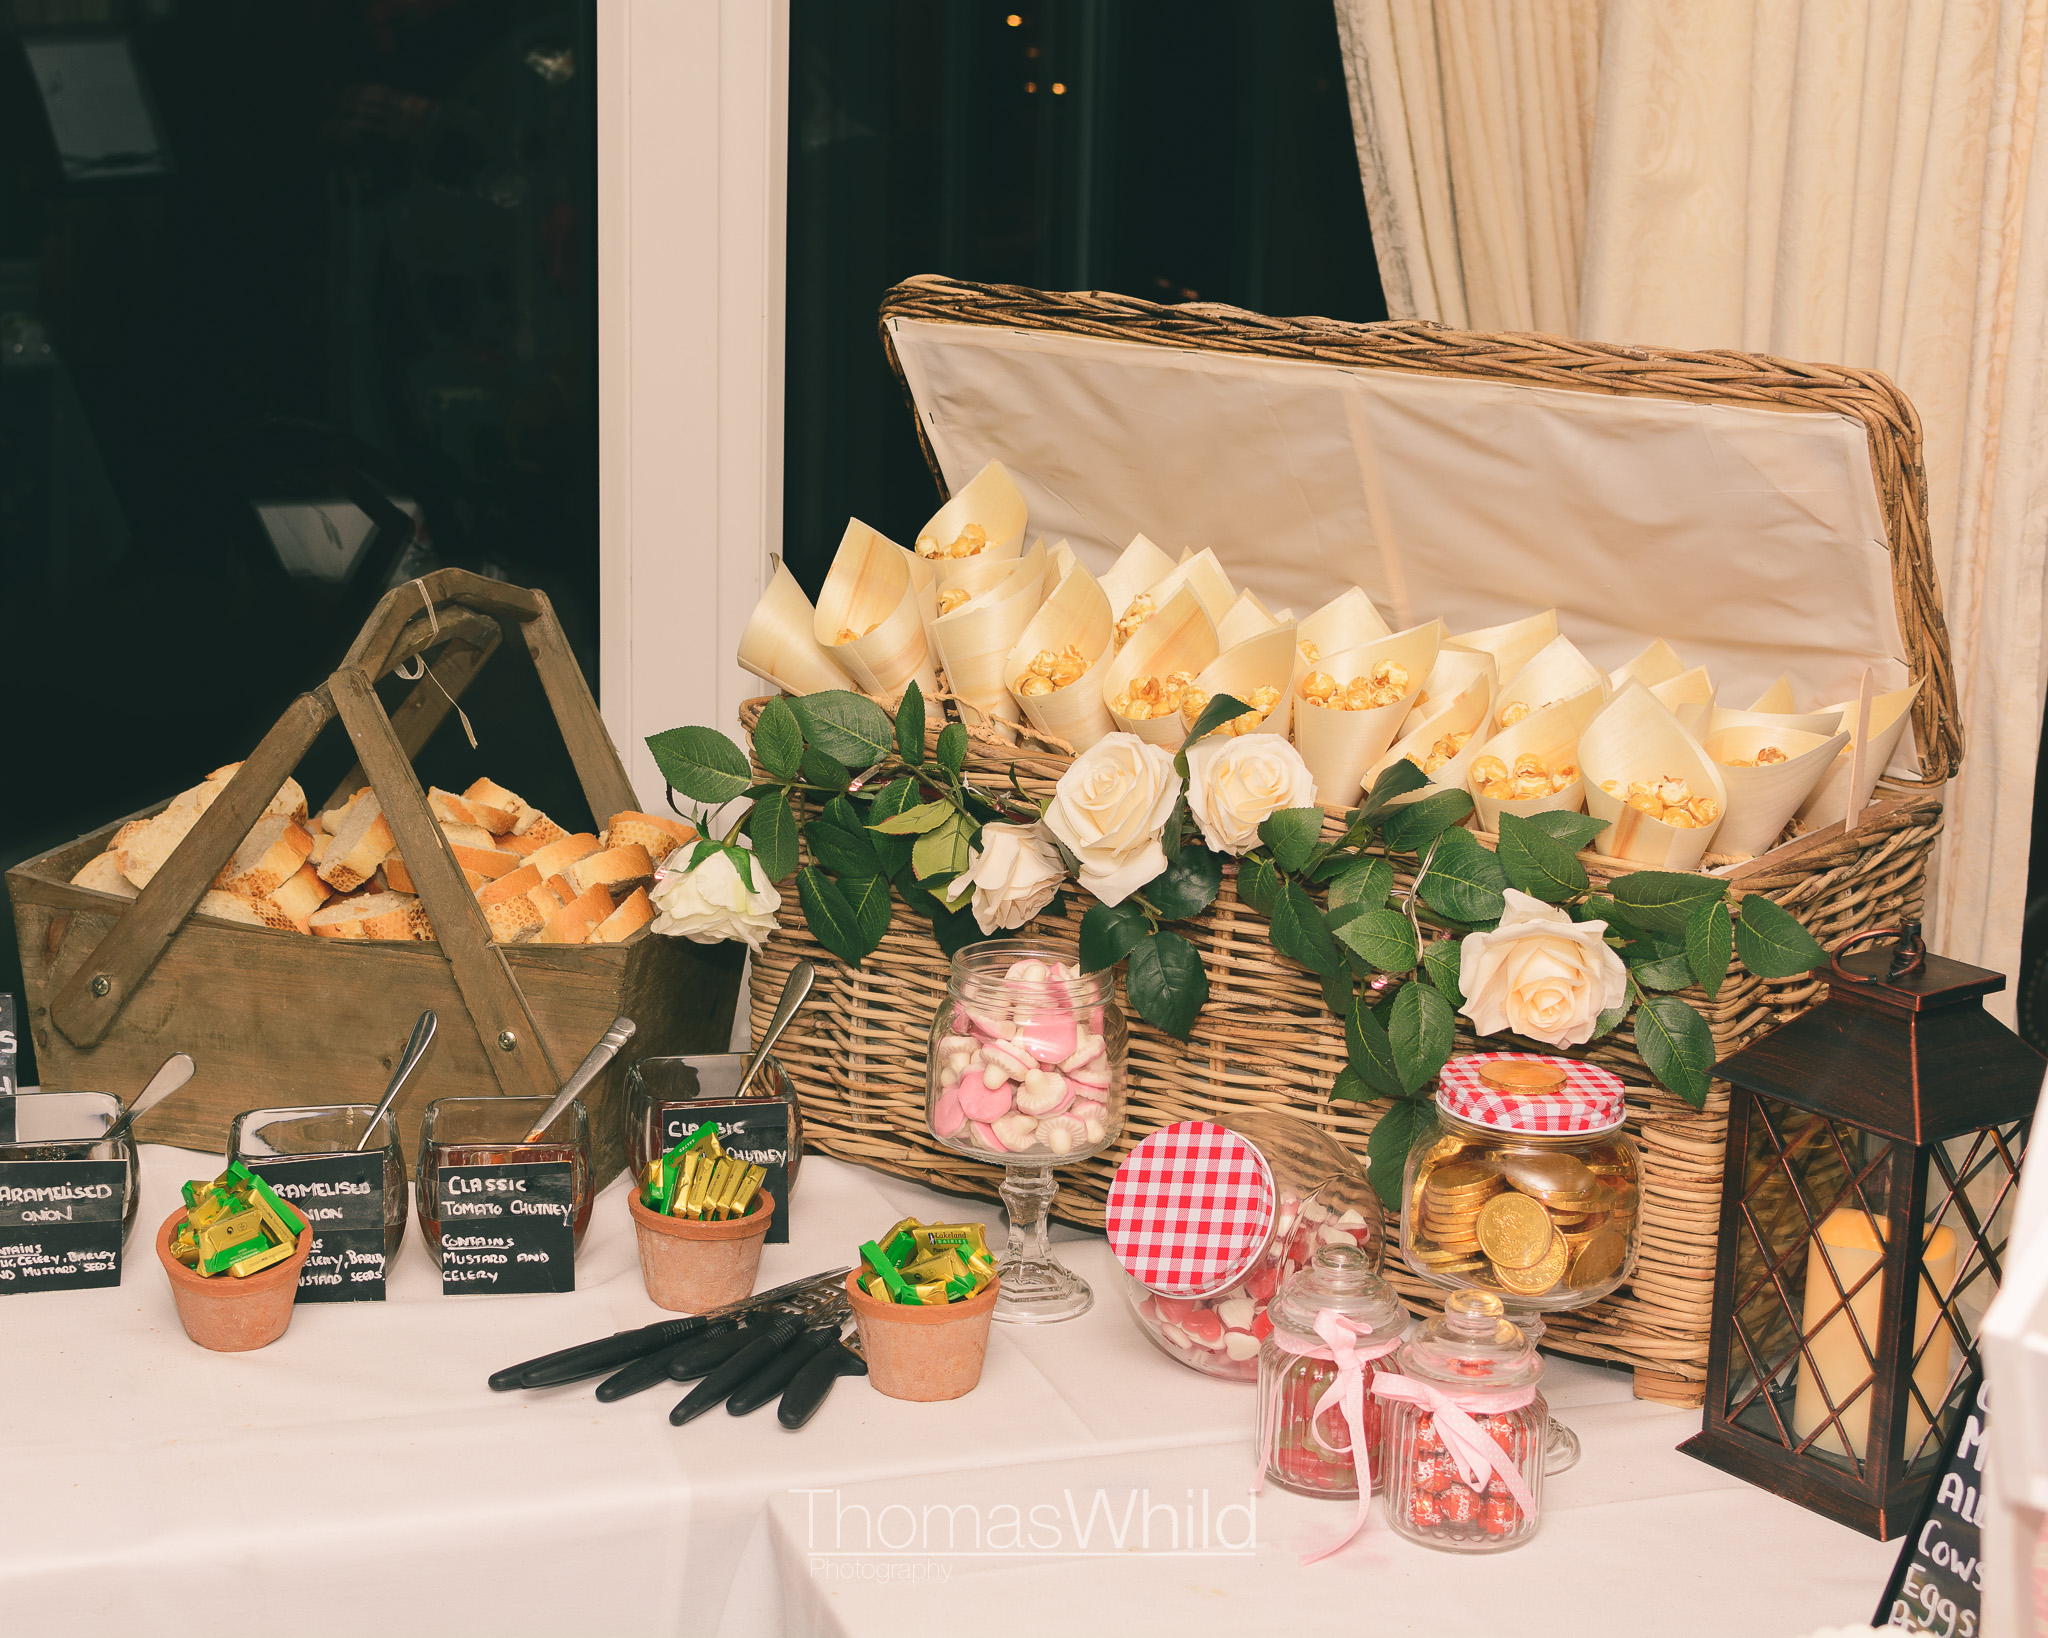 Sweets treats and wedding catering | Bournemouth Wedding Photographer | Thomas Whild Photography